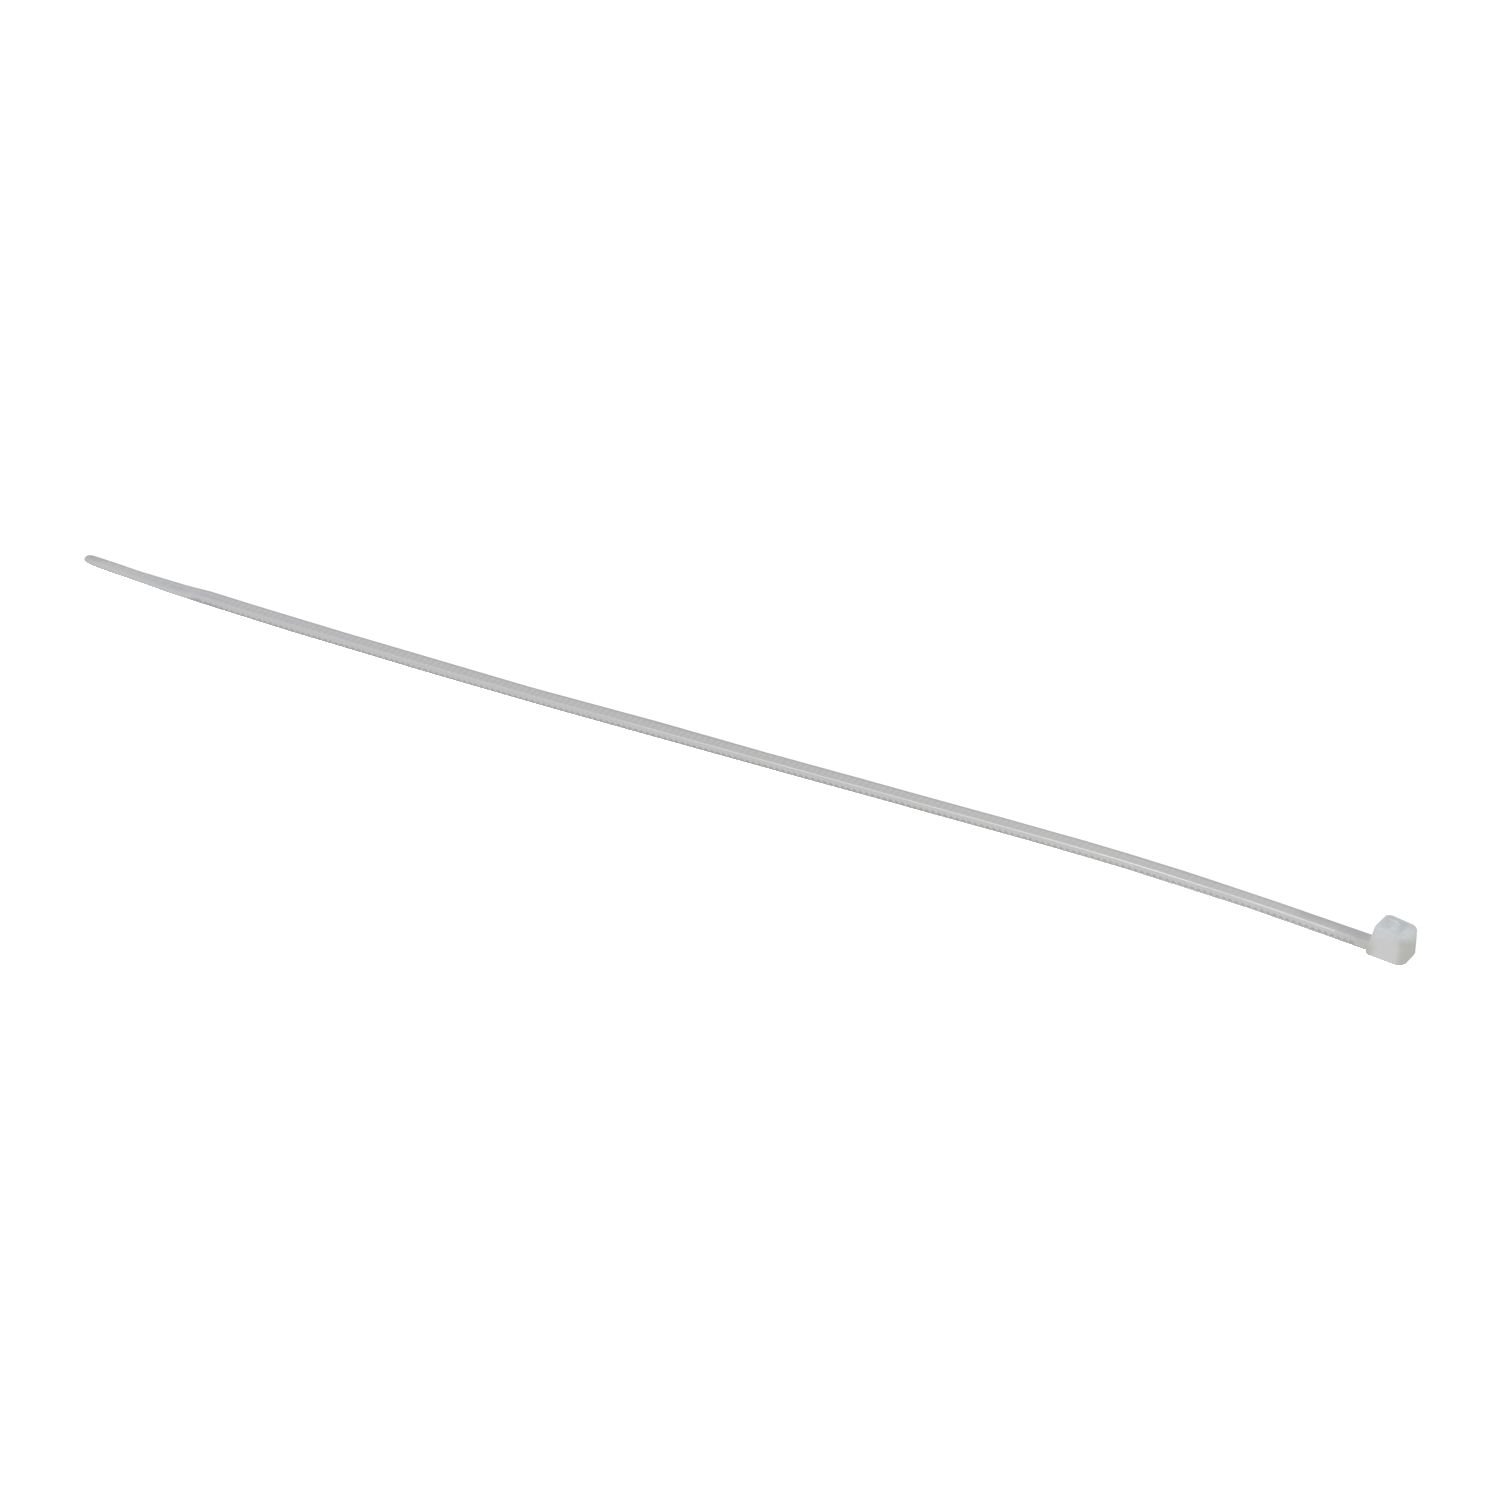 IMT46158 Thorsman - cable tie - natural - 2.5 x 200 mm